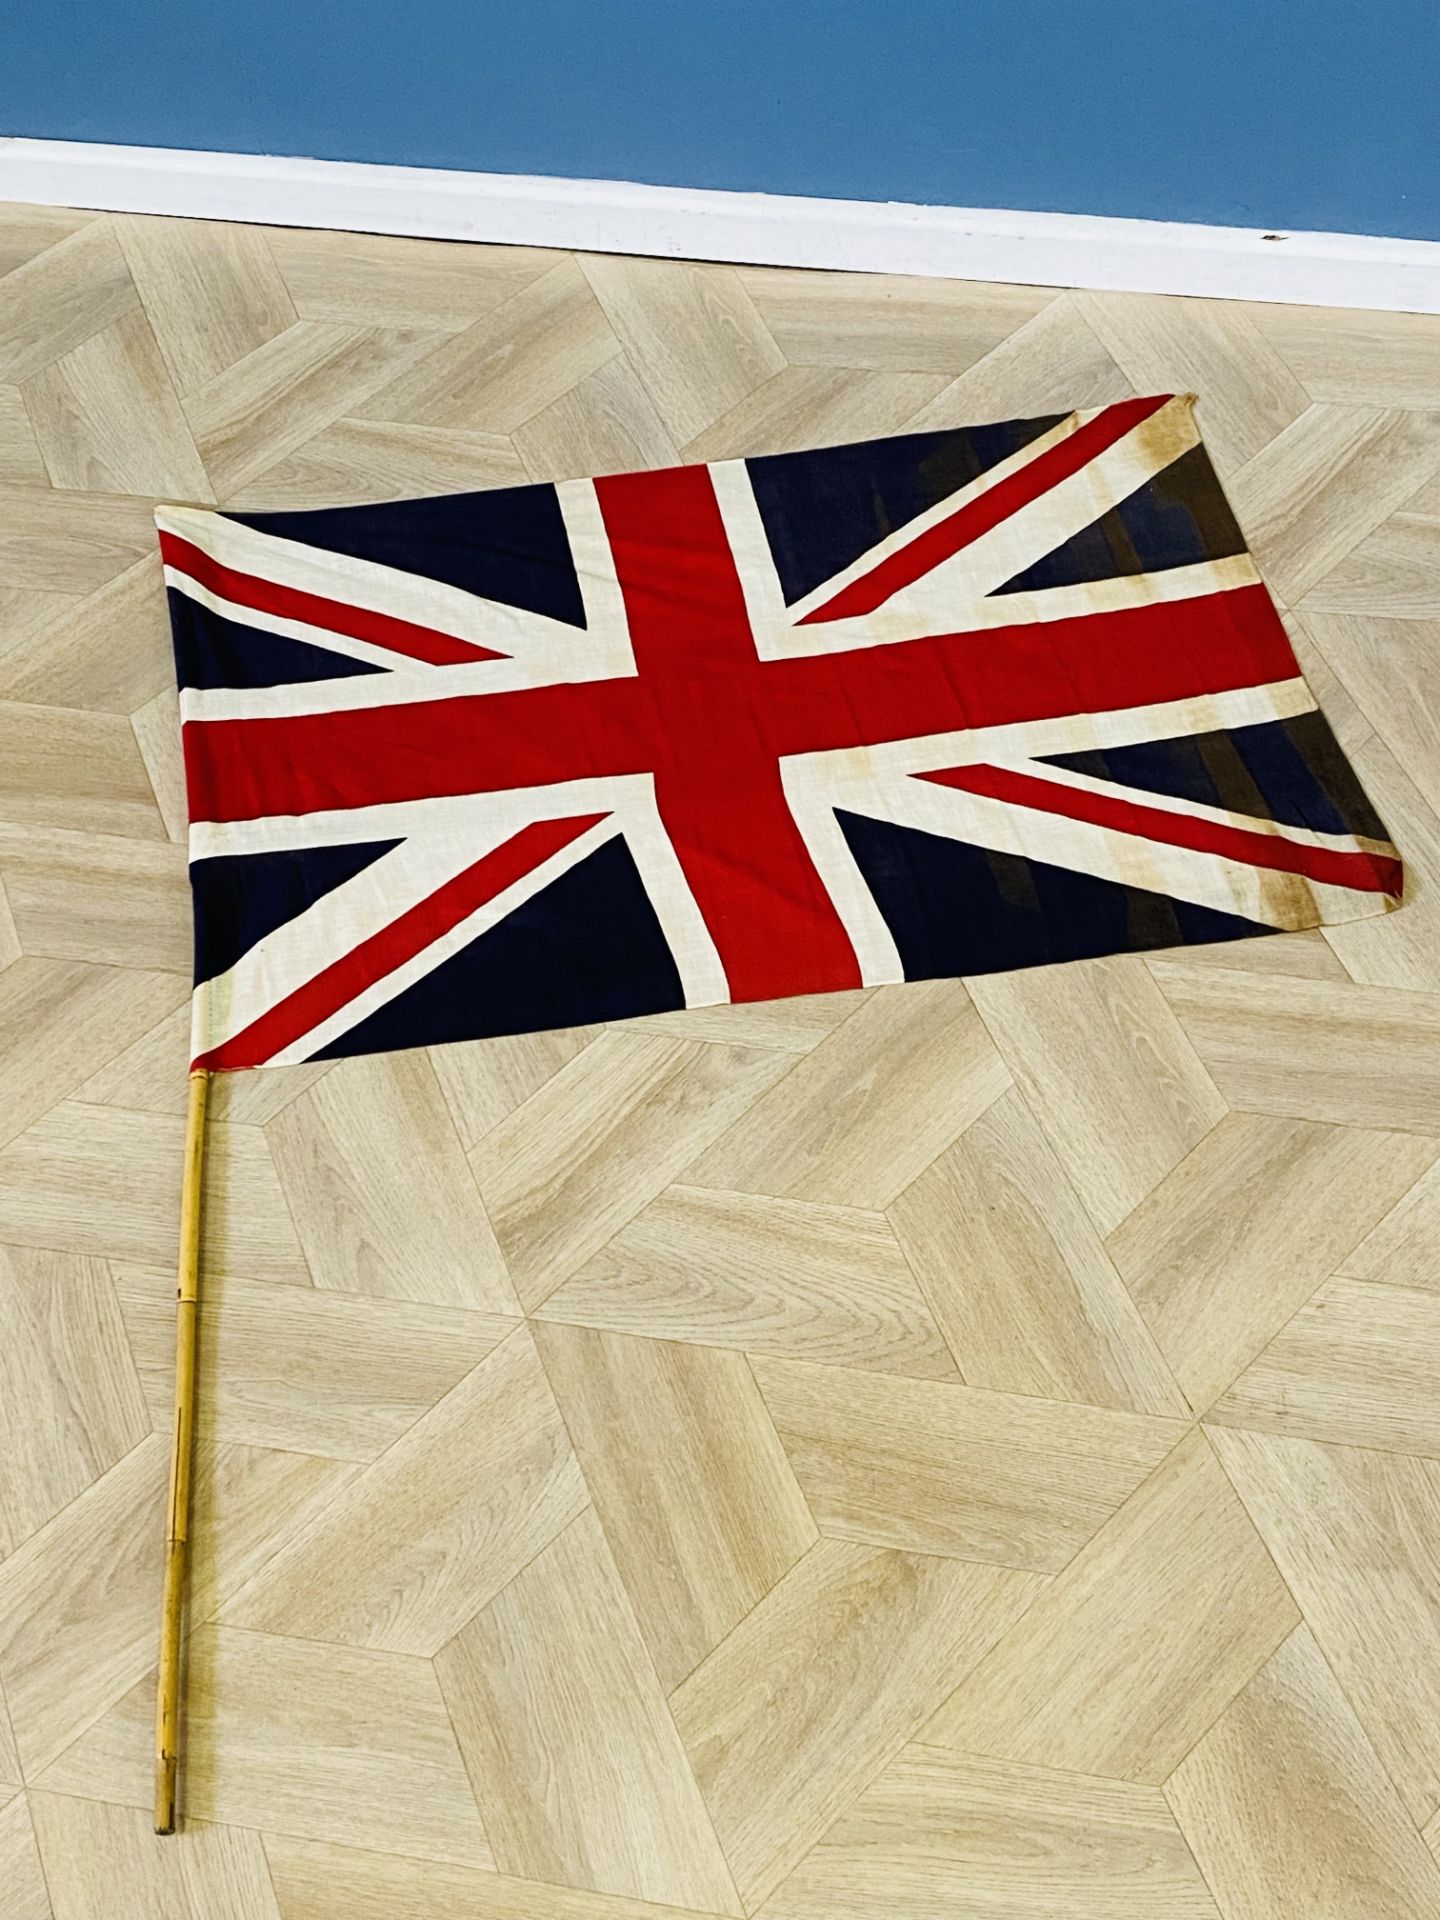 Four Union Jack flags on poles - Image 4 of 5